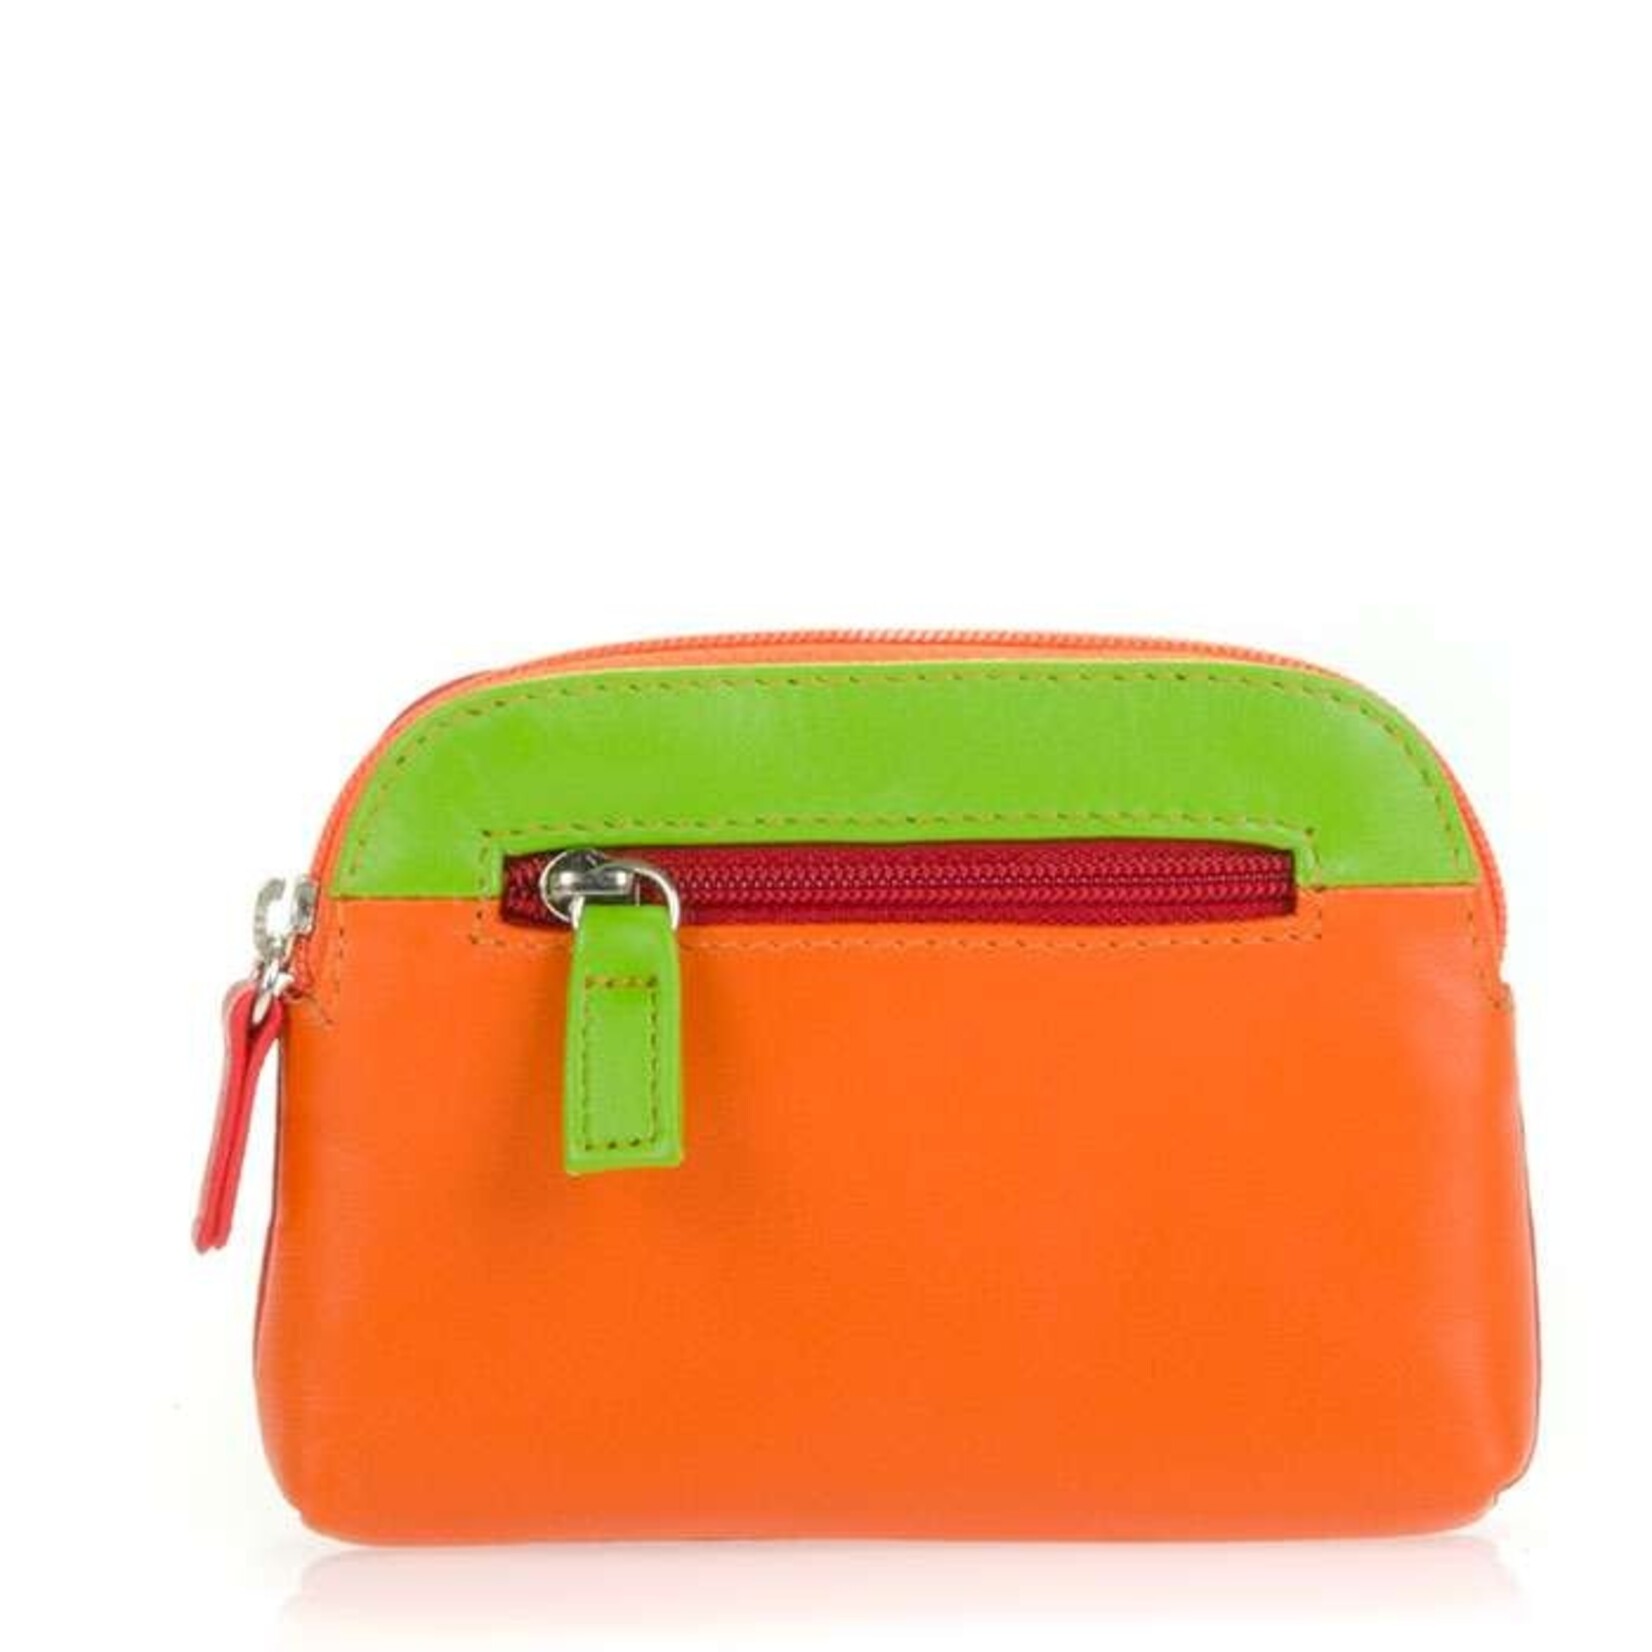 MYWALIT LARGE COIN PURSE